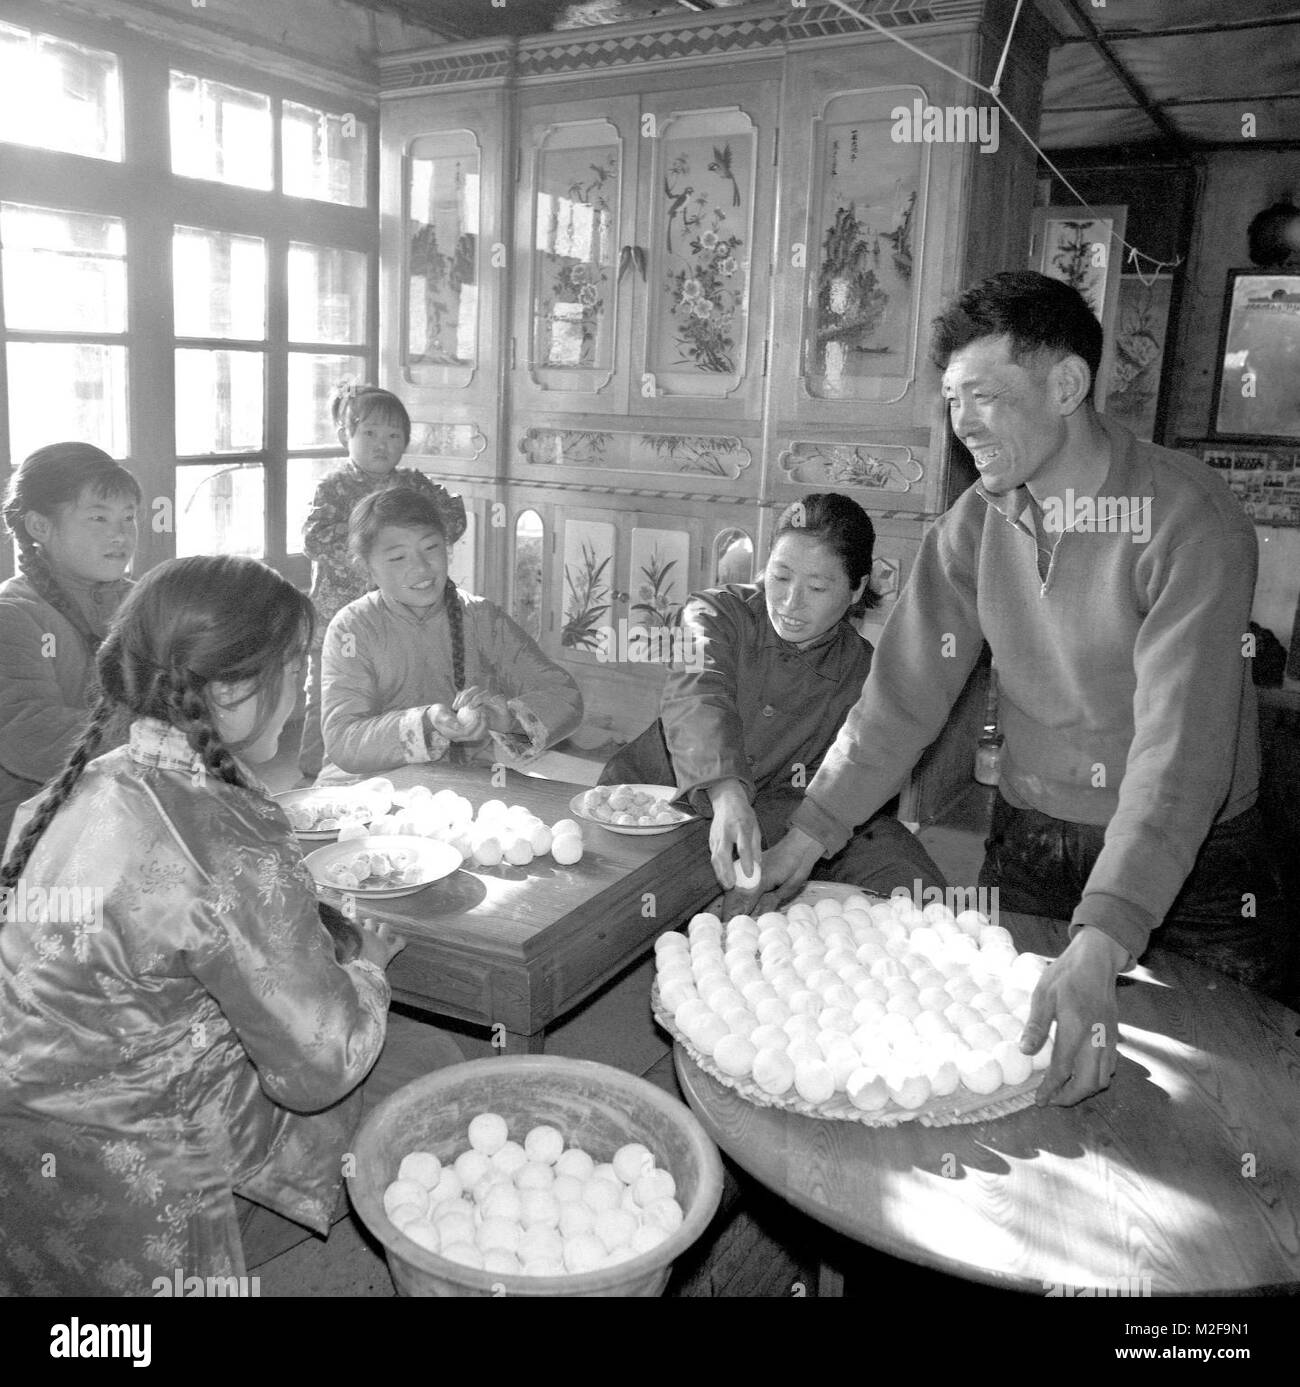 (180207) -- BEIJING, Feb. 7, 2018 (Xinhua) -- File photo taken in February, 1980 shows a family cooking 'niandoubao', a kind of steamed bun stuffed with sweetened bean paste, in Hailun County, northeast China's Heilongjiang Province. According to traditional cultural elements and customs, some indispensable dishes carrying symbolic meanings are served during the Spring Festival. They are ceremonious processes and sweet memories for those who live and work away from home. Spring Festival, or better known as Chinese Lunar New Year, is the most important festival for all Chinese, which has a hi Stock Photo